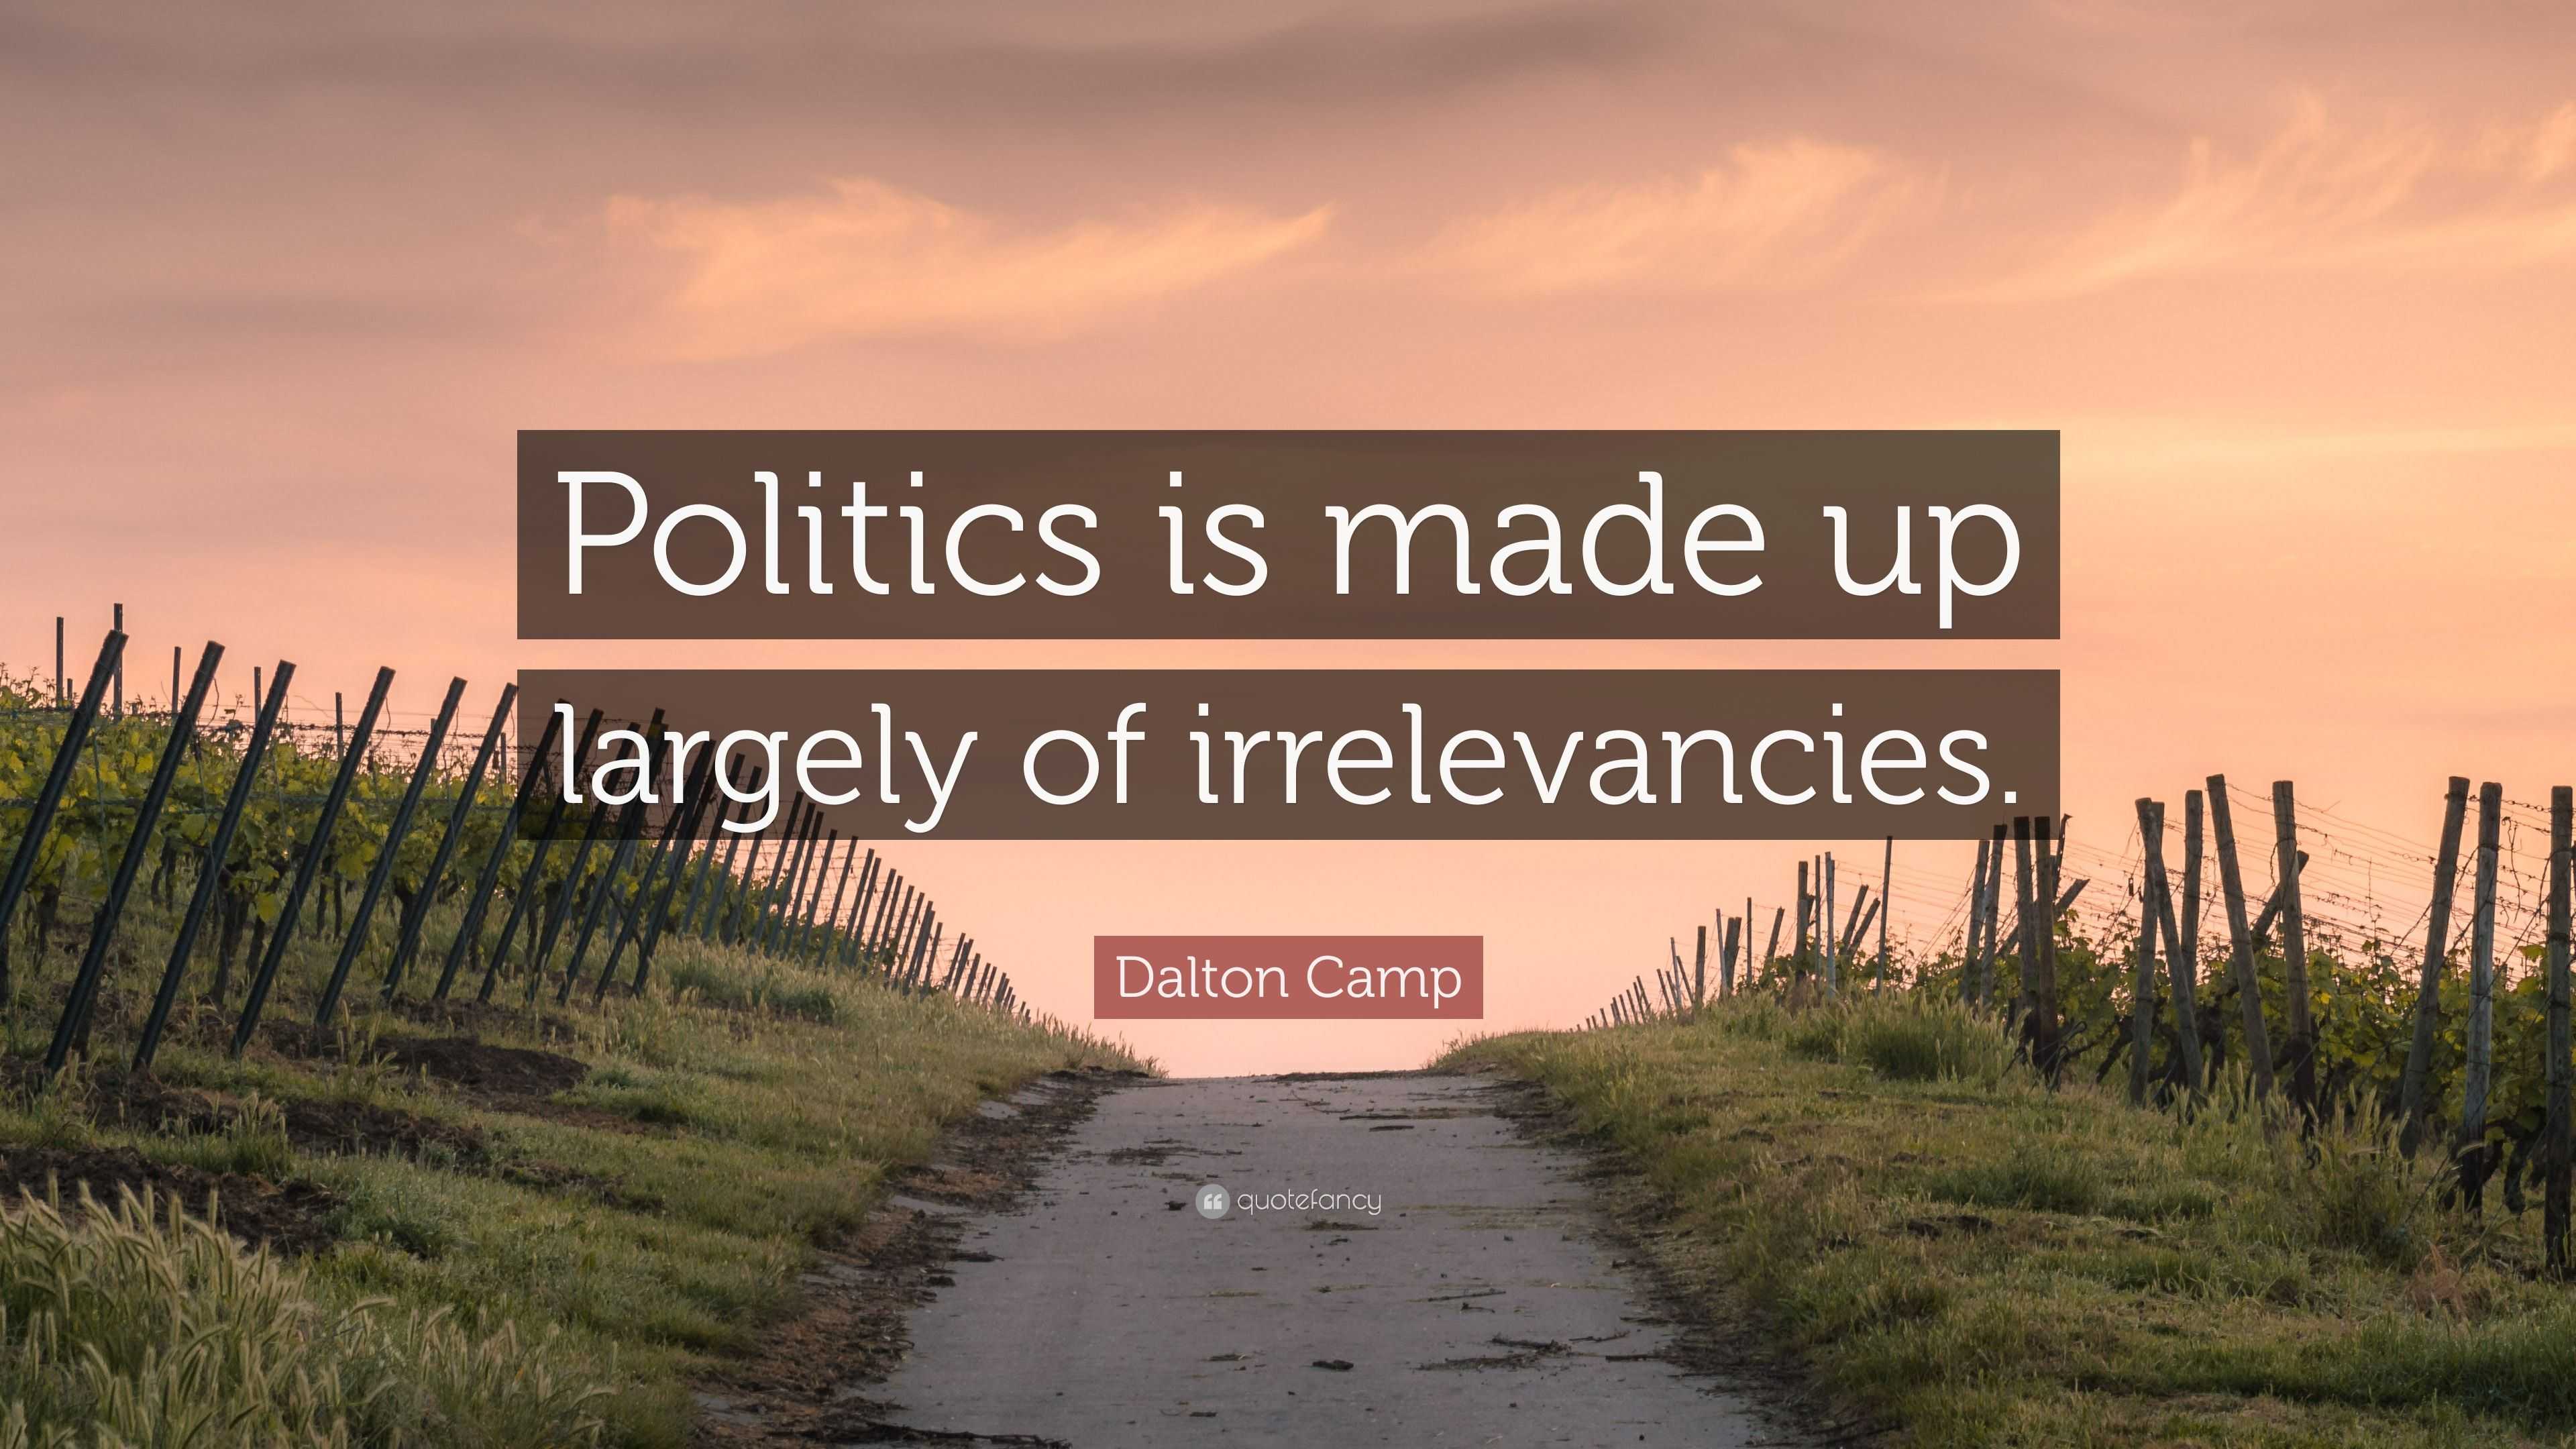 Dalton Camp Quote: “Politics is made up largely of irrelevancies.”